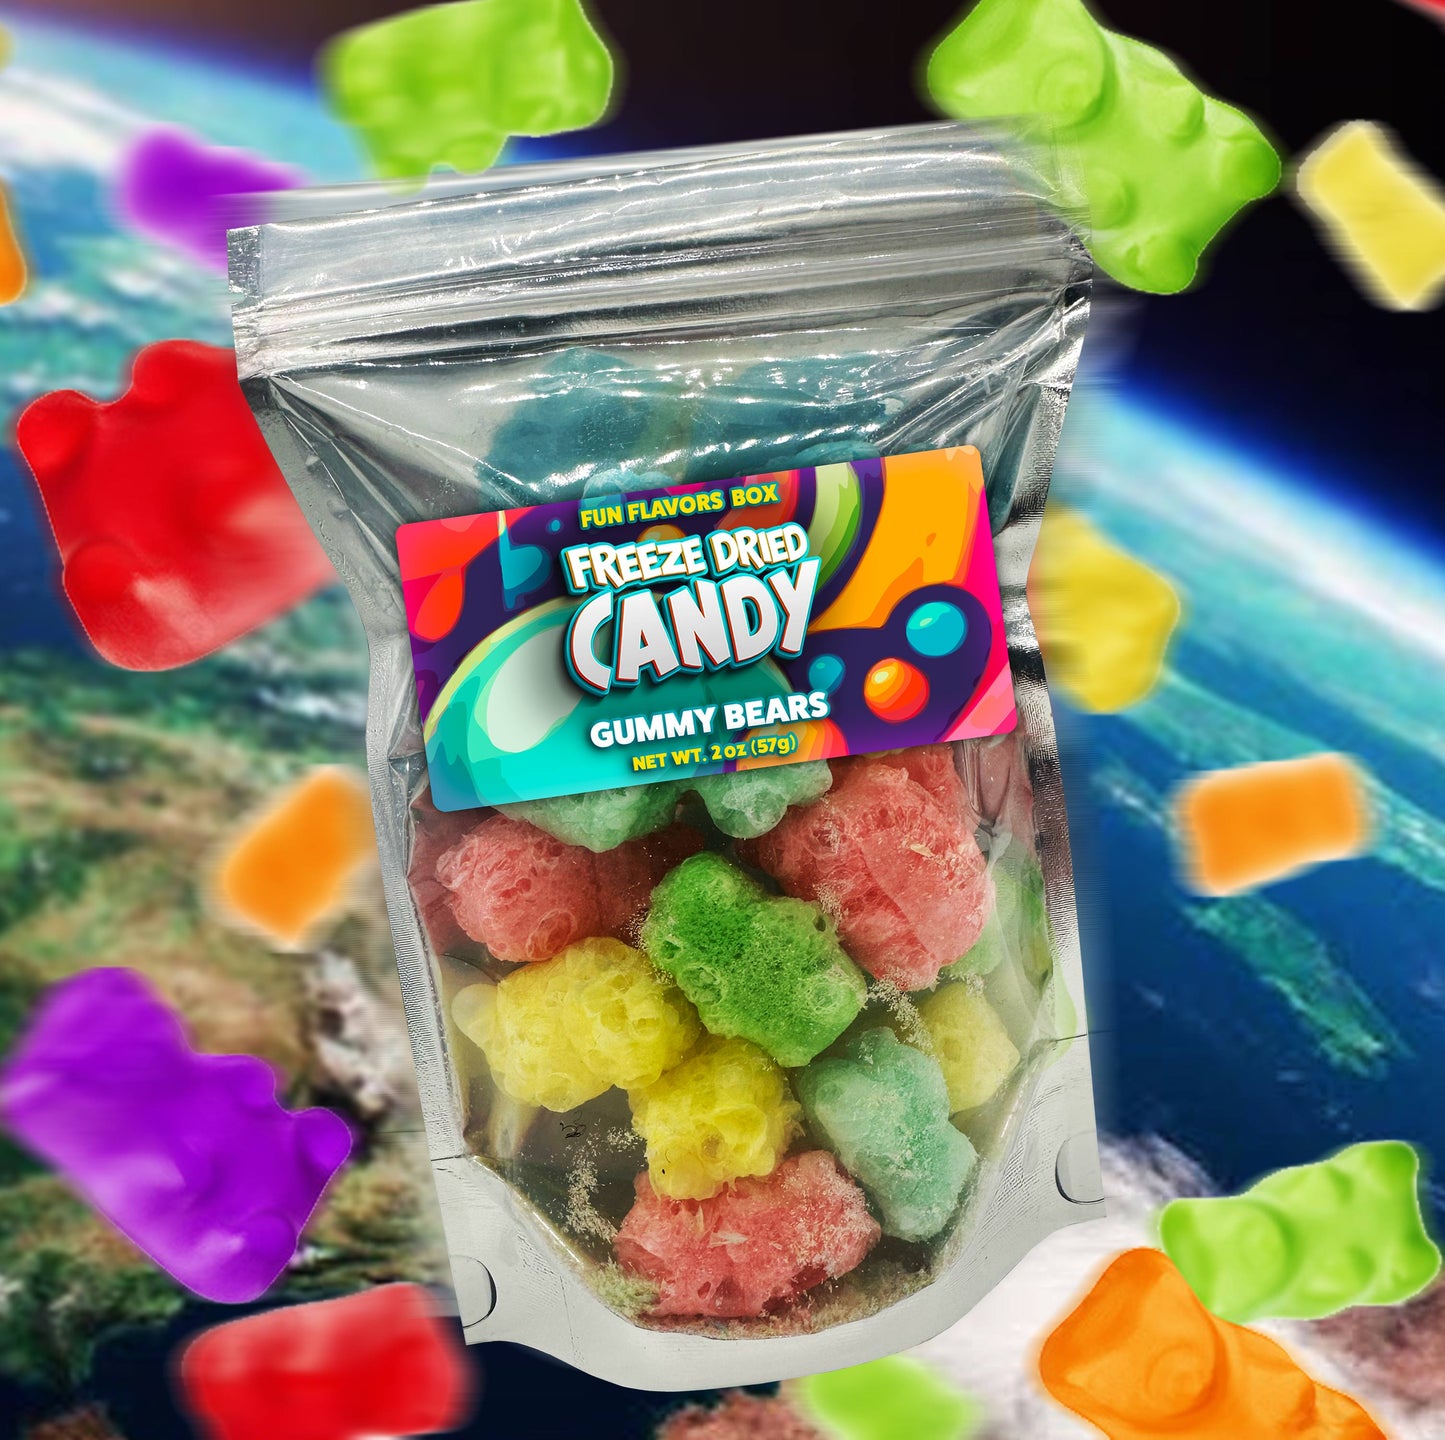 Freeze Dried Candy Gummy Bears Variety Pack Crunchy Treats – Space Theme Party Favor Gift Idea, 2 oz